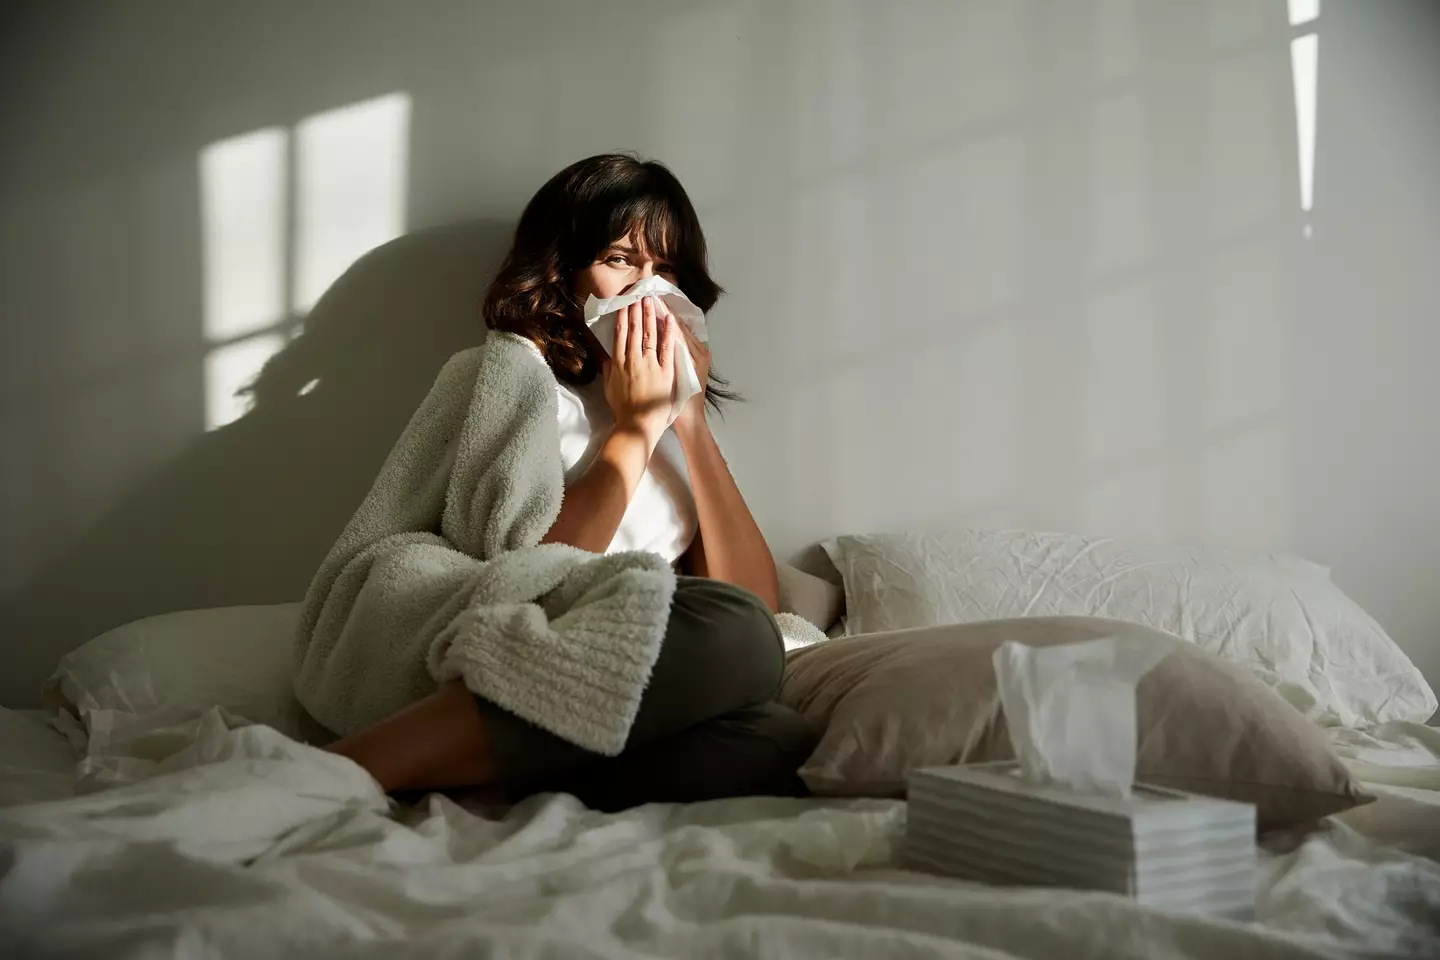 Sneezing and runny noses could be signs you're sleeping with dust mites.